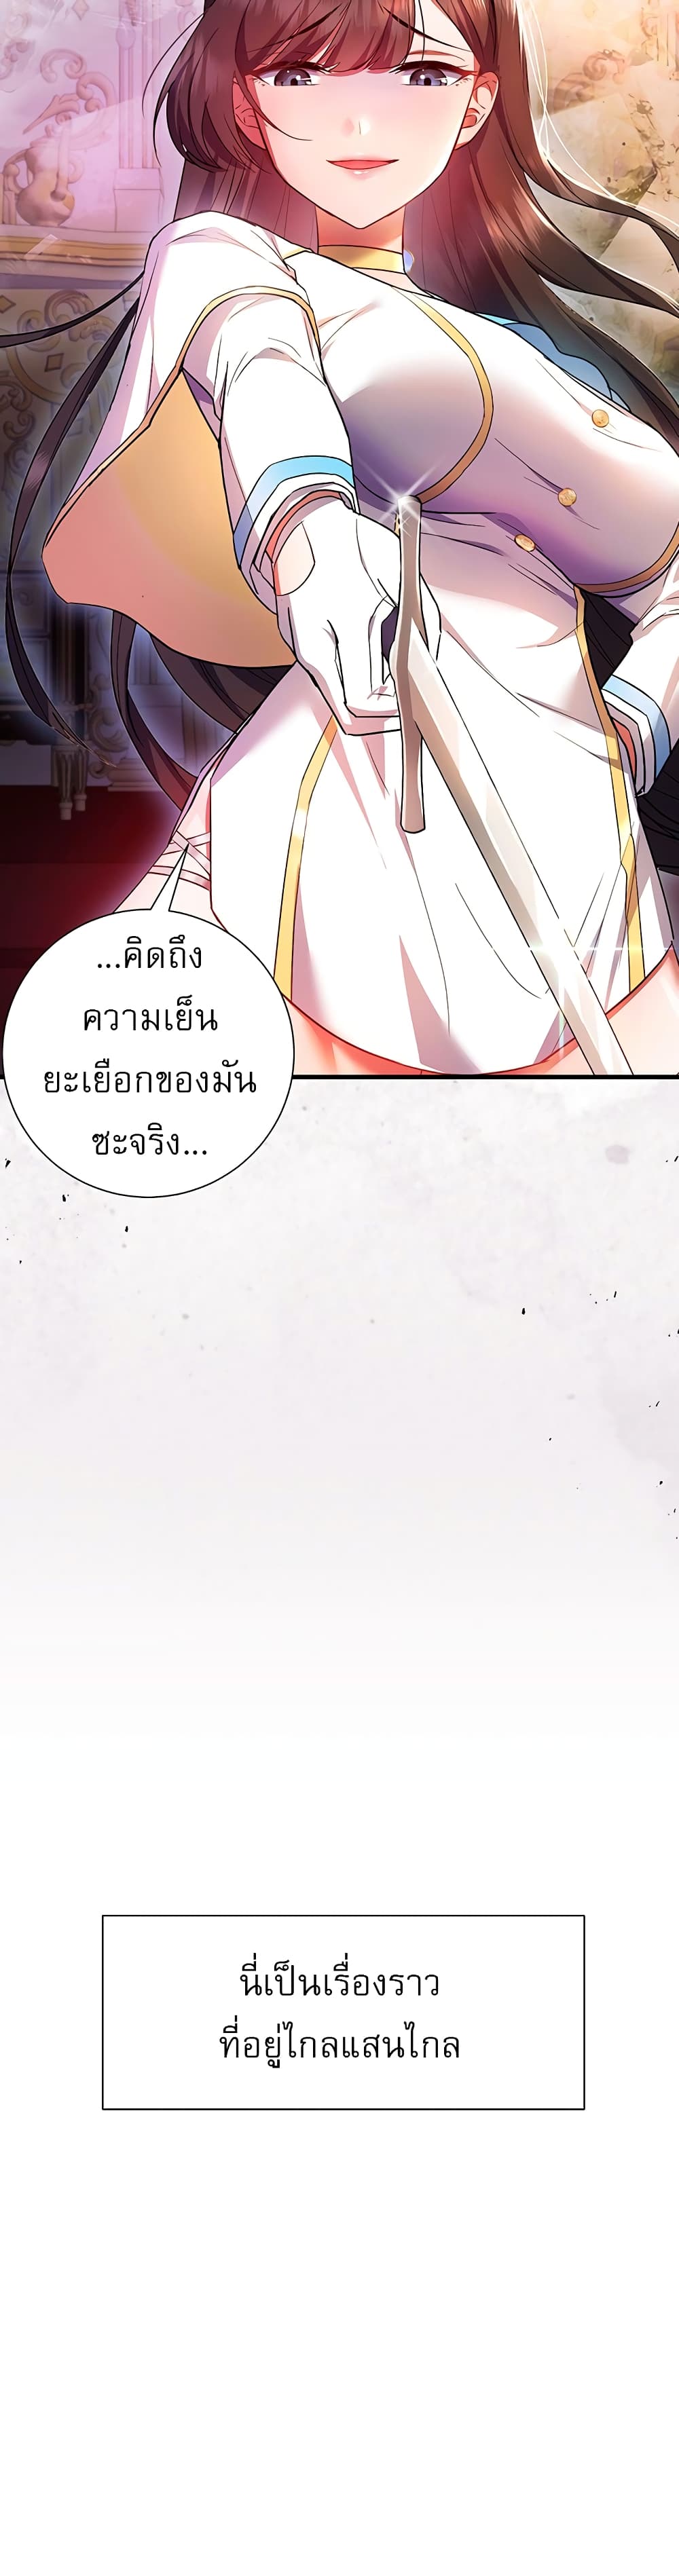 Taming an Evil Young Lady ตอนที่ 1 ภาพ 6